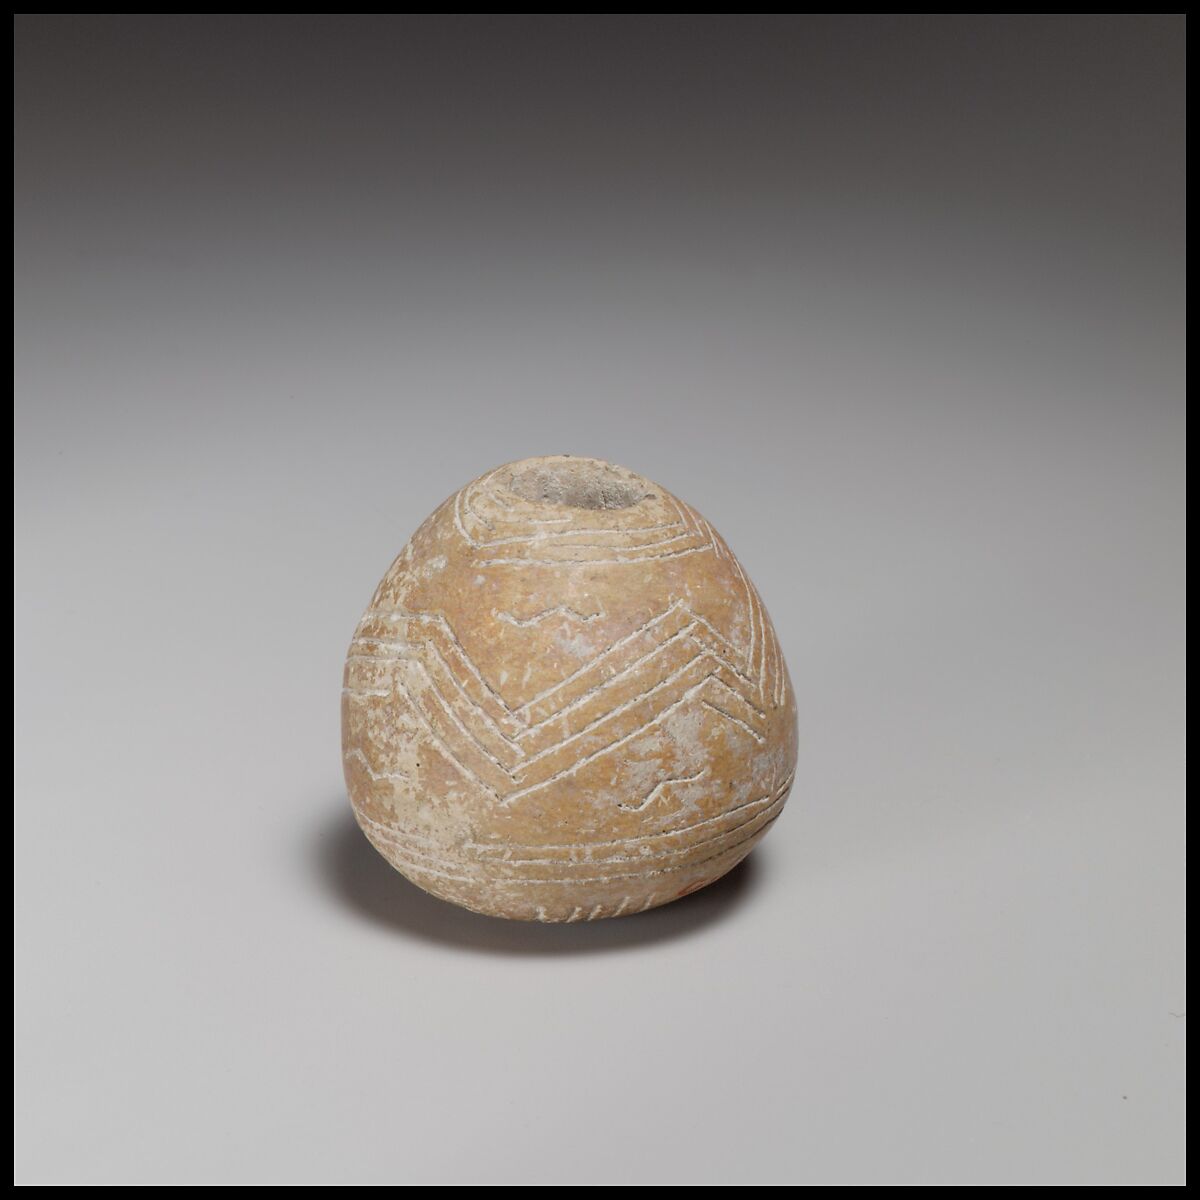 Terracotta conical-hemispherical spindle-whorl with rounded base, Terracotta, Cypriot 